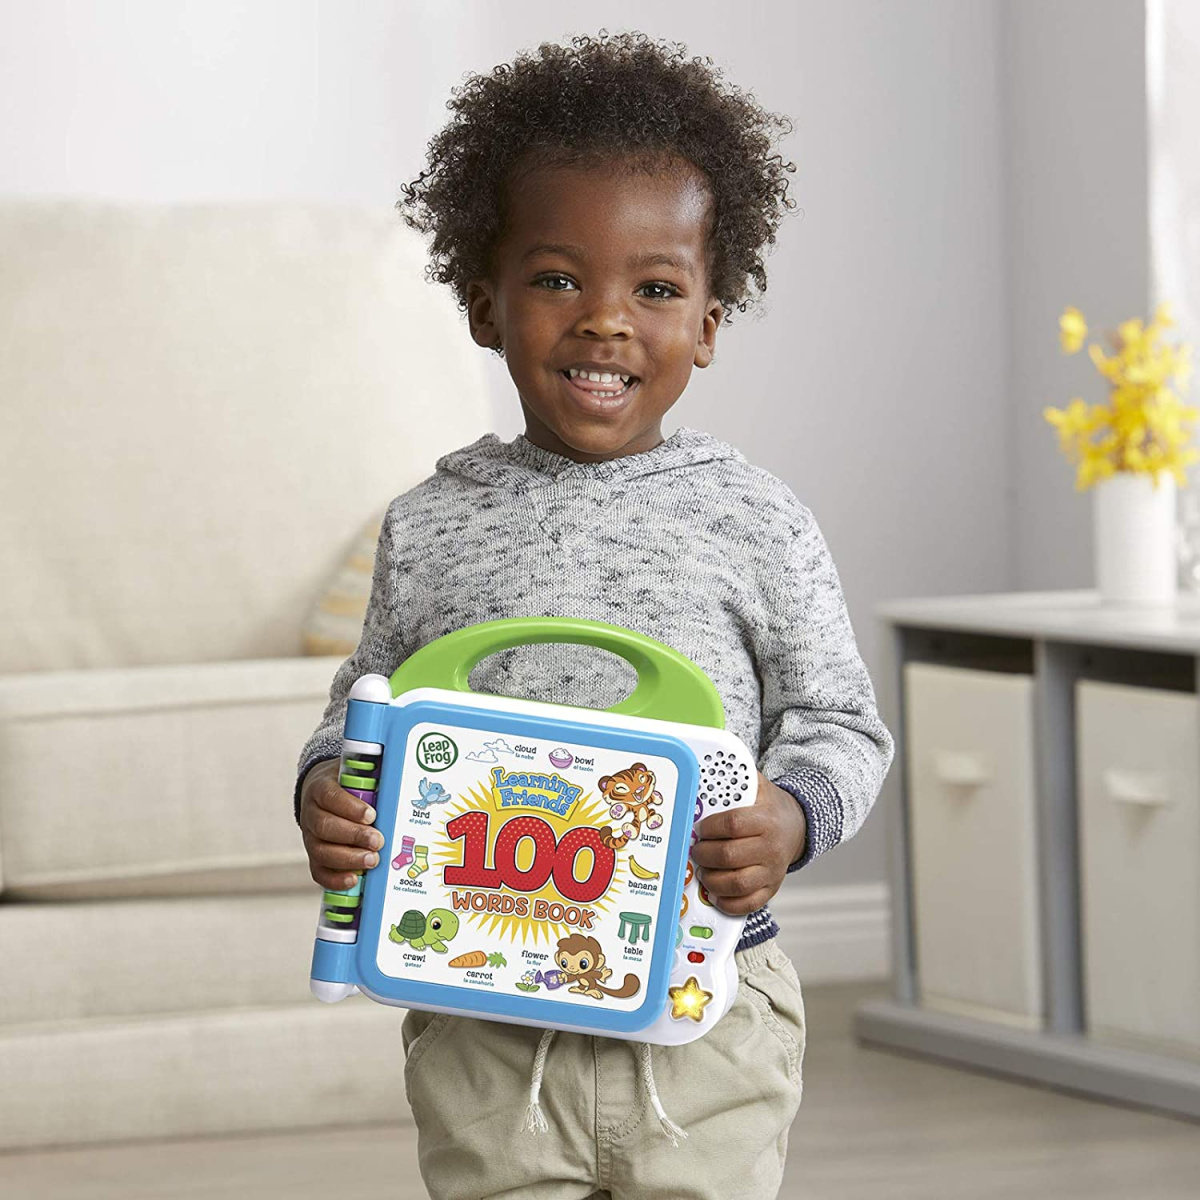 A boy holding a LeapFrog Learning Words Book